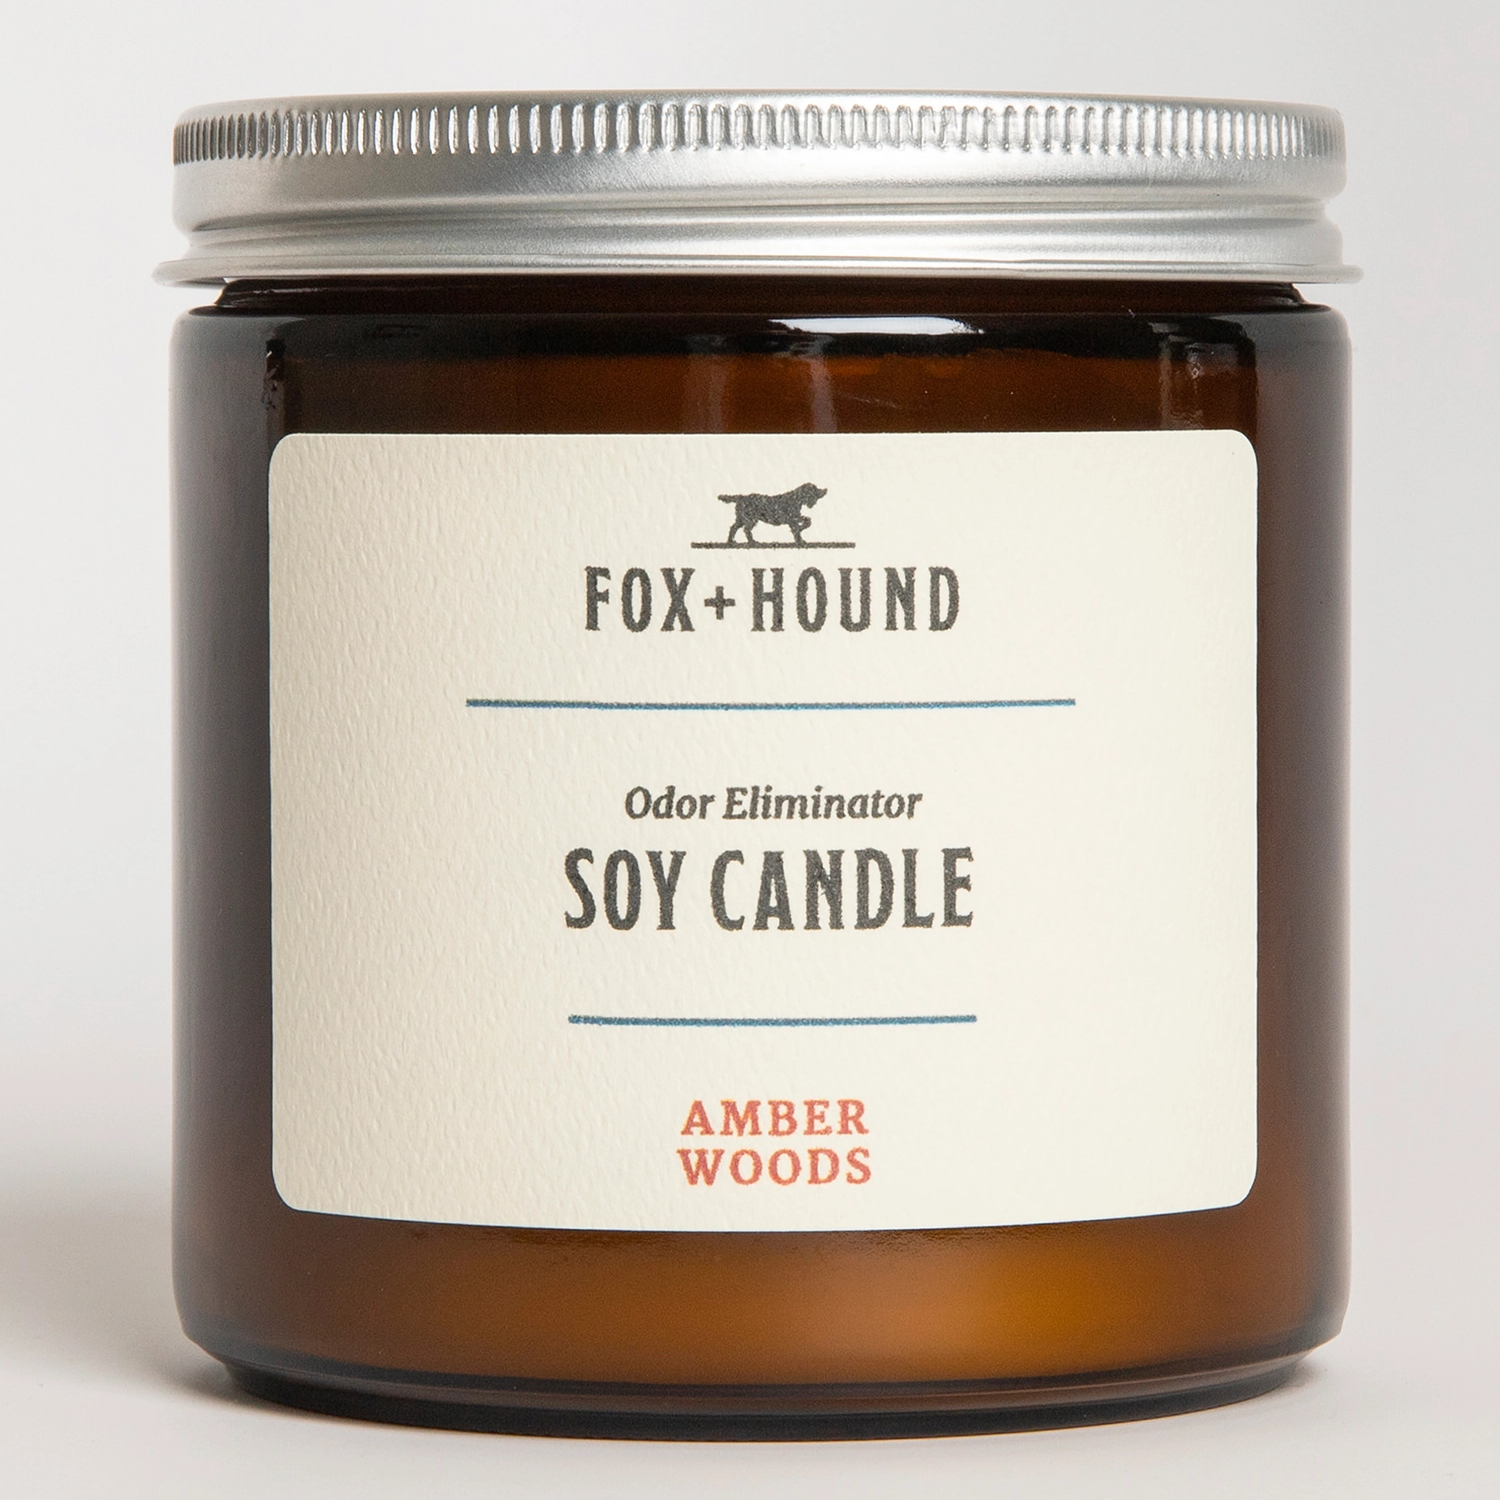 Pet Boutique - Dog Grooming - Bath and Body - Odor Eliminator Soy Candle: Amber Woods by Fox + Hound